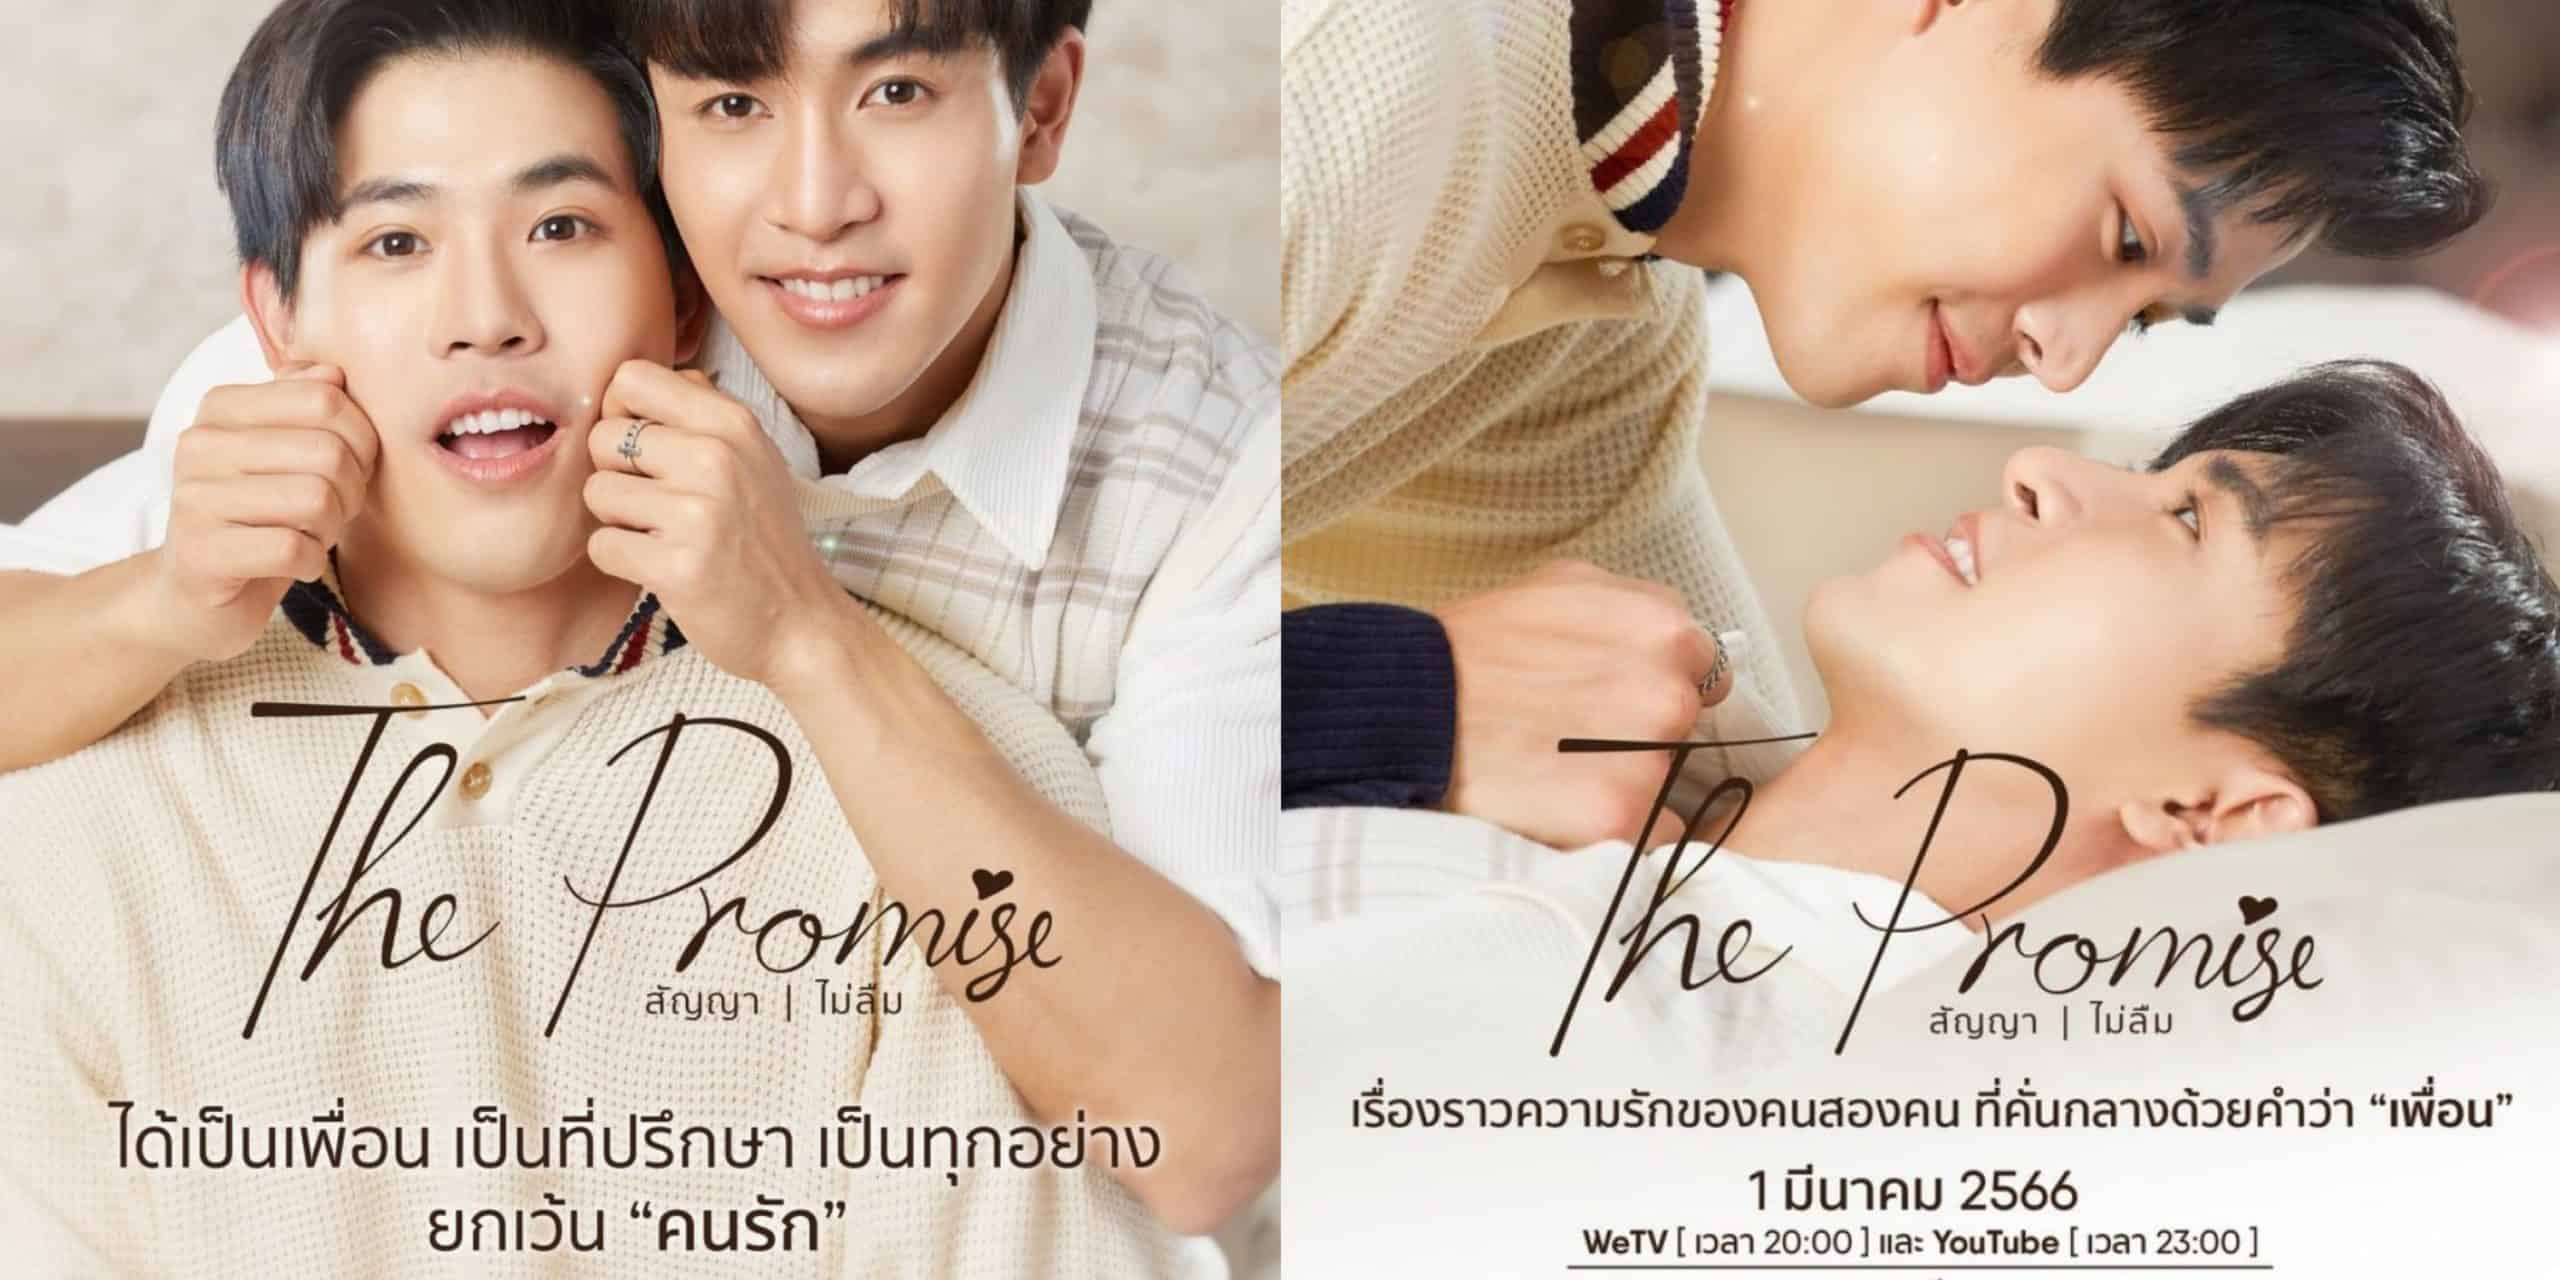 The Promise Thai BL Series Episode 5 Release Date